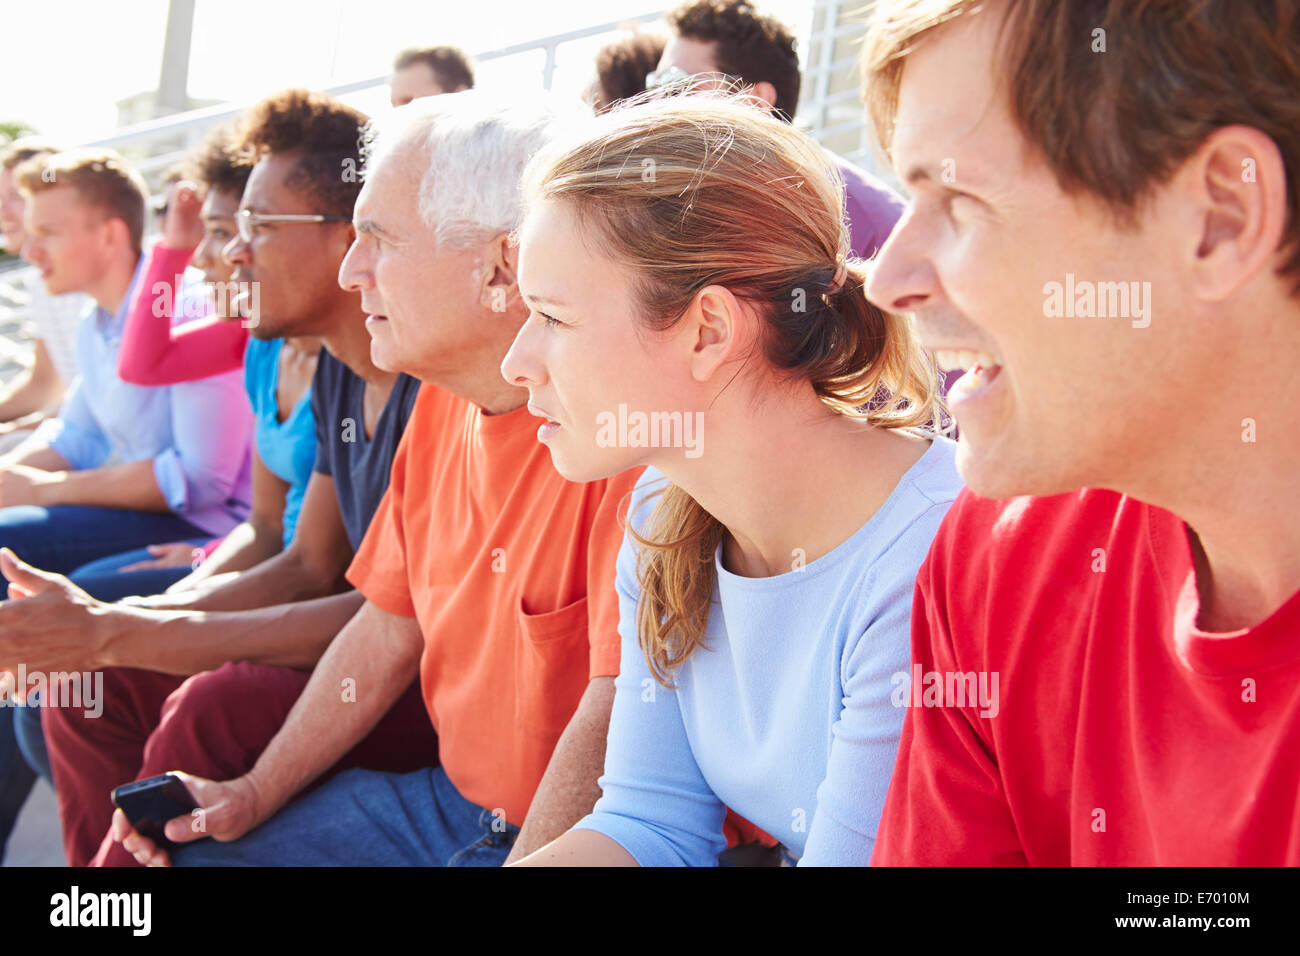 Audience Watching Outdoor Concert Performance Stock Photo